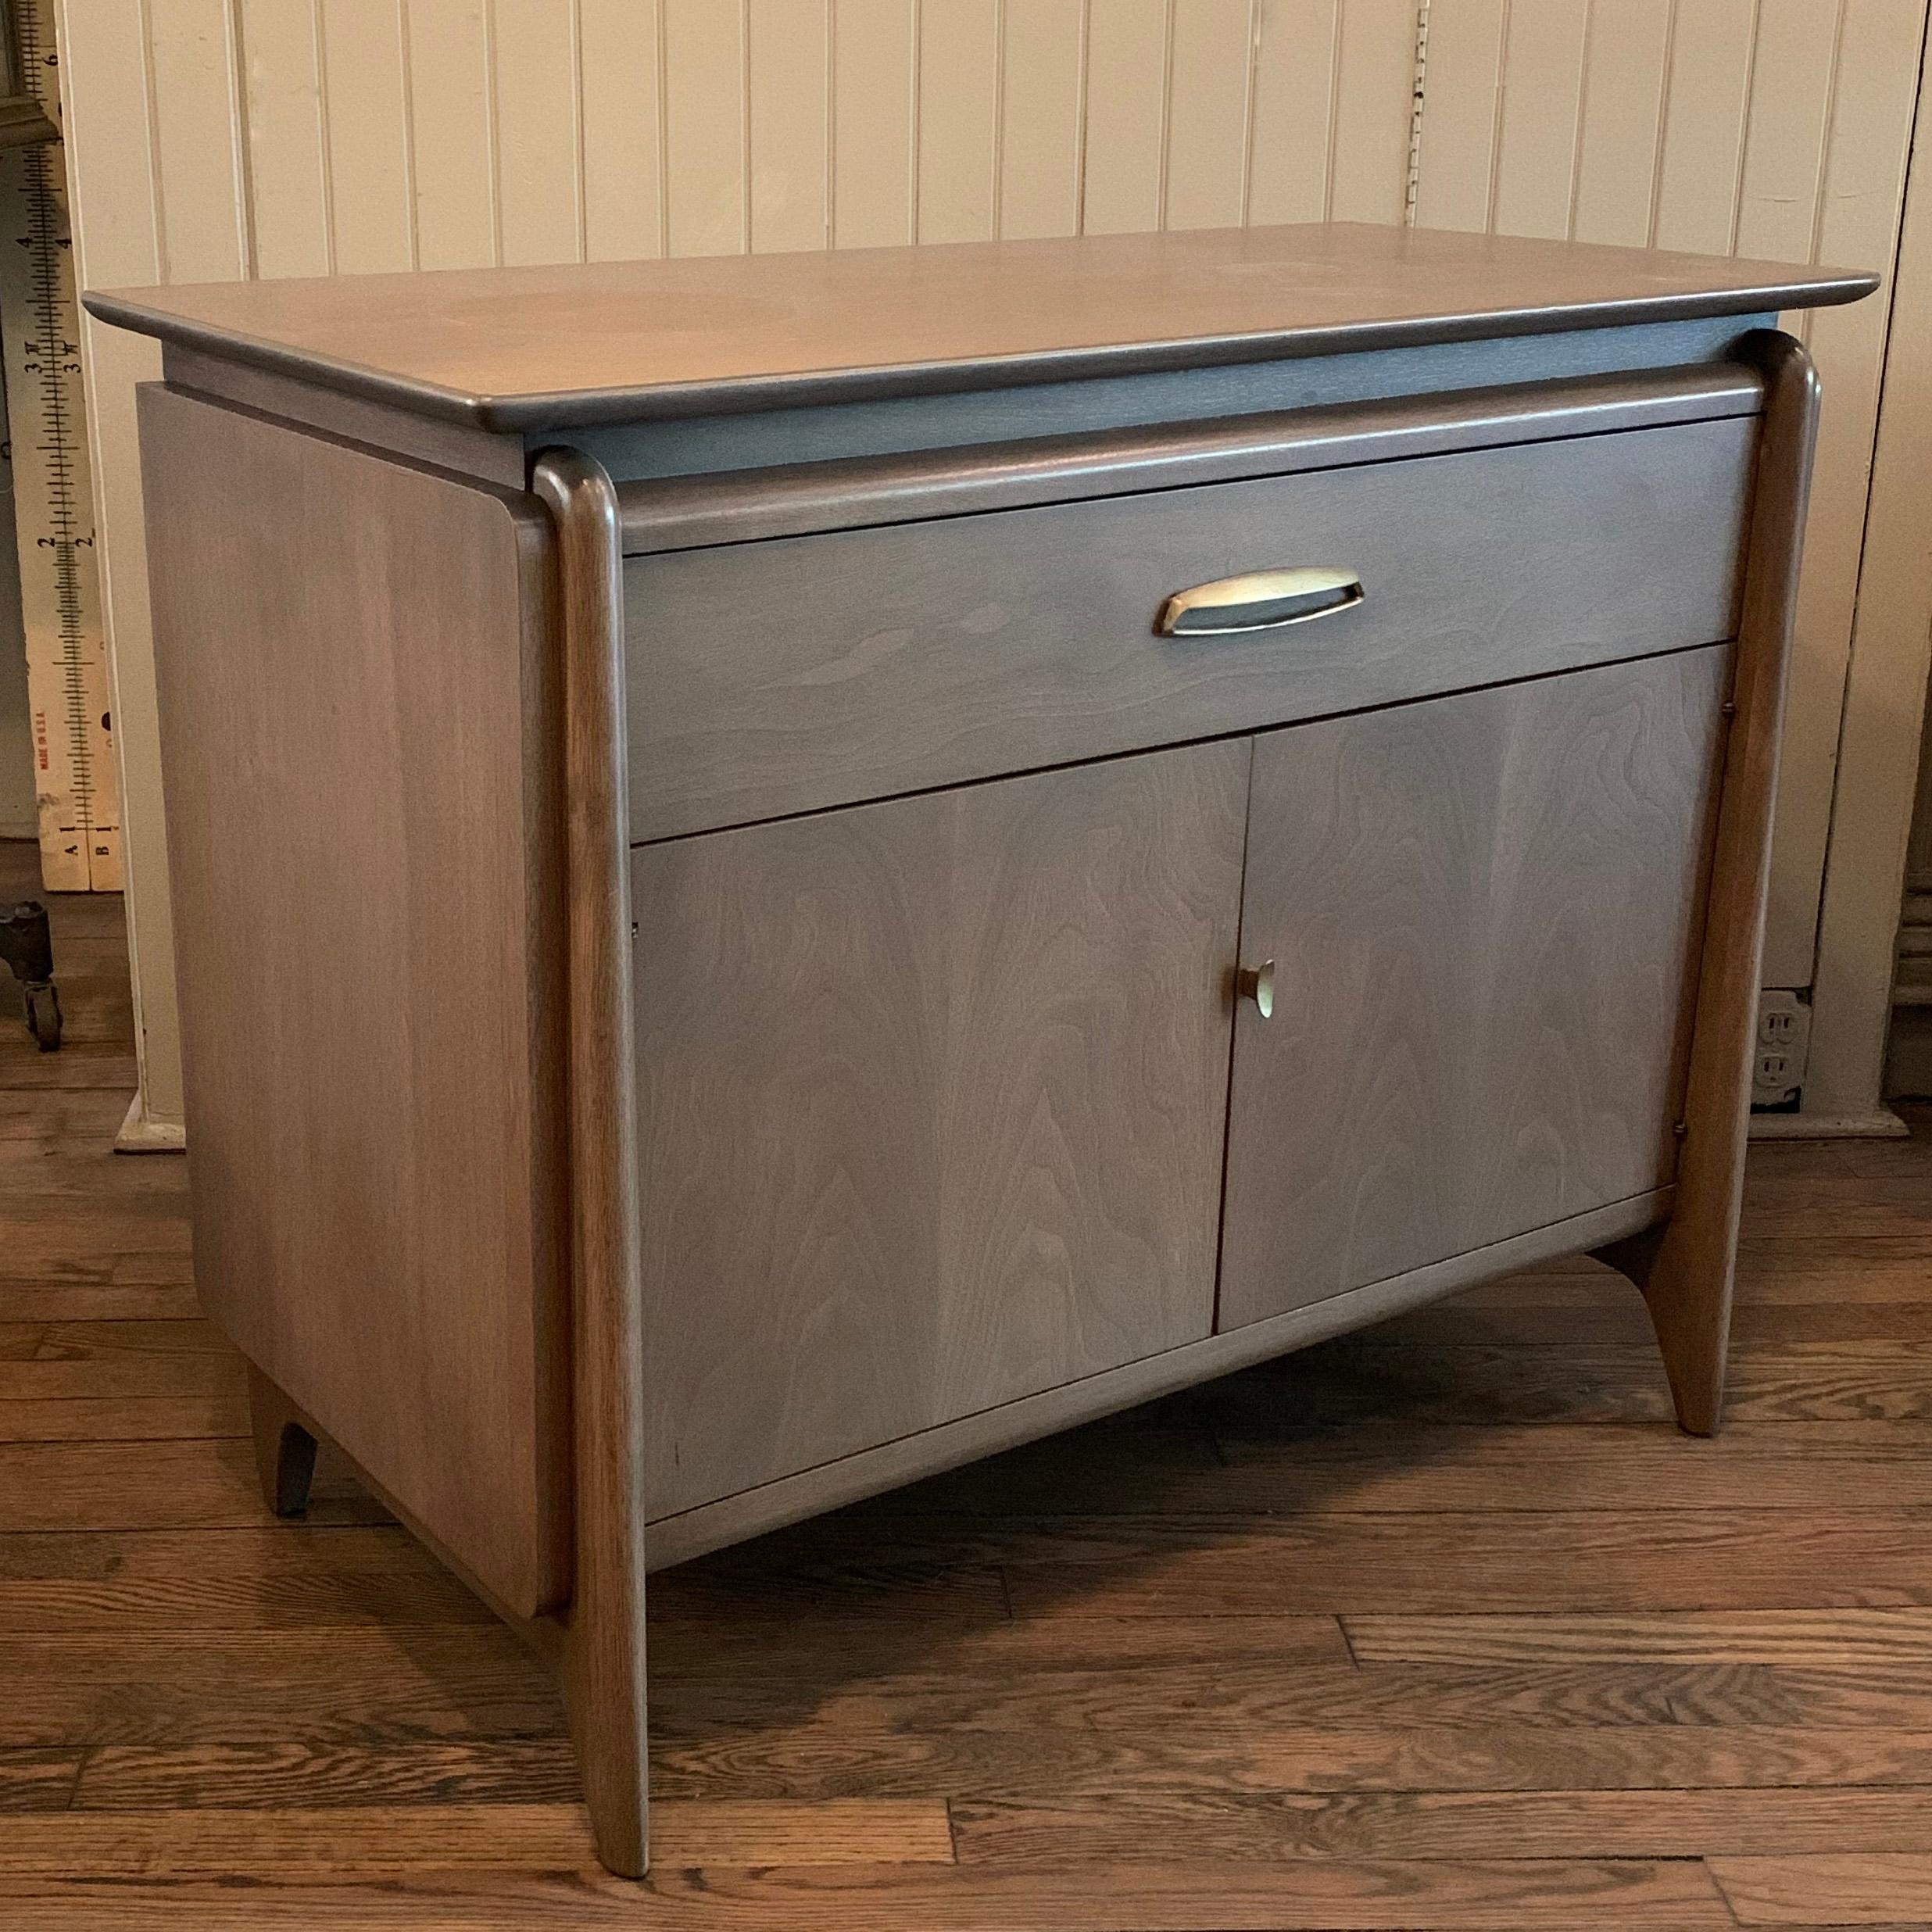 Wonderfully detailed, Mid-Century Modern, pickled mahogany, sideboard cabinet by John Van Koert for Drexel features cabinet space below with 14 inch interior height and a fixed shelf and top drawer with brass pulls.